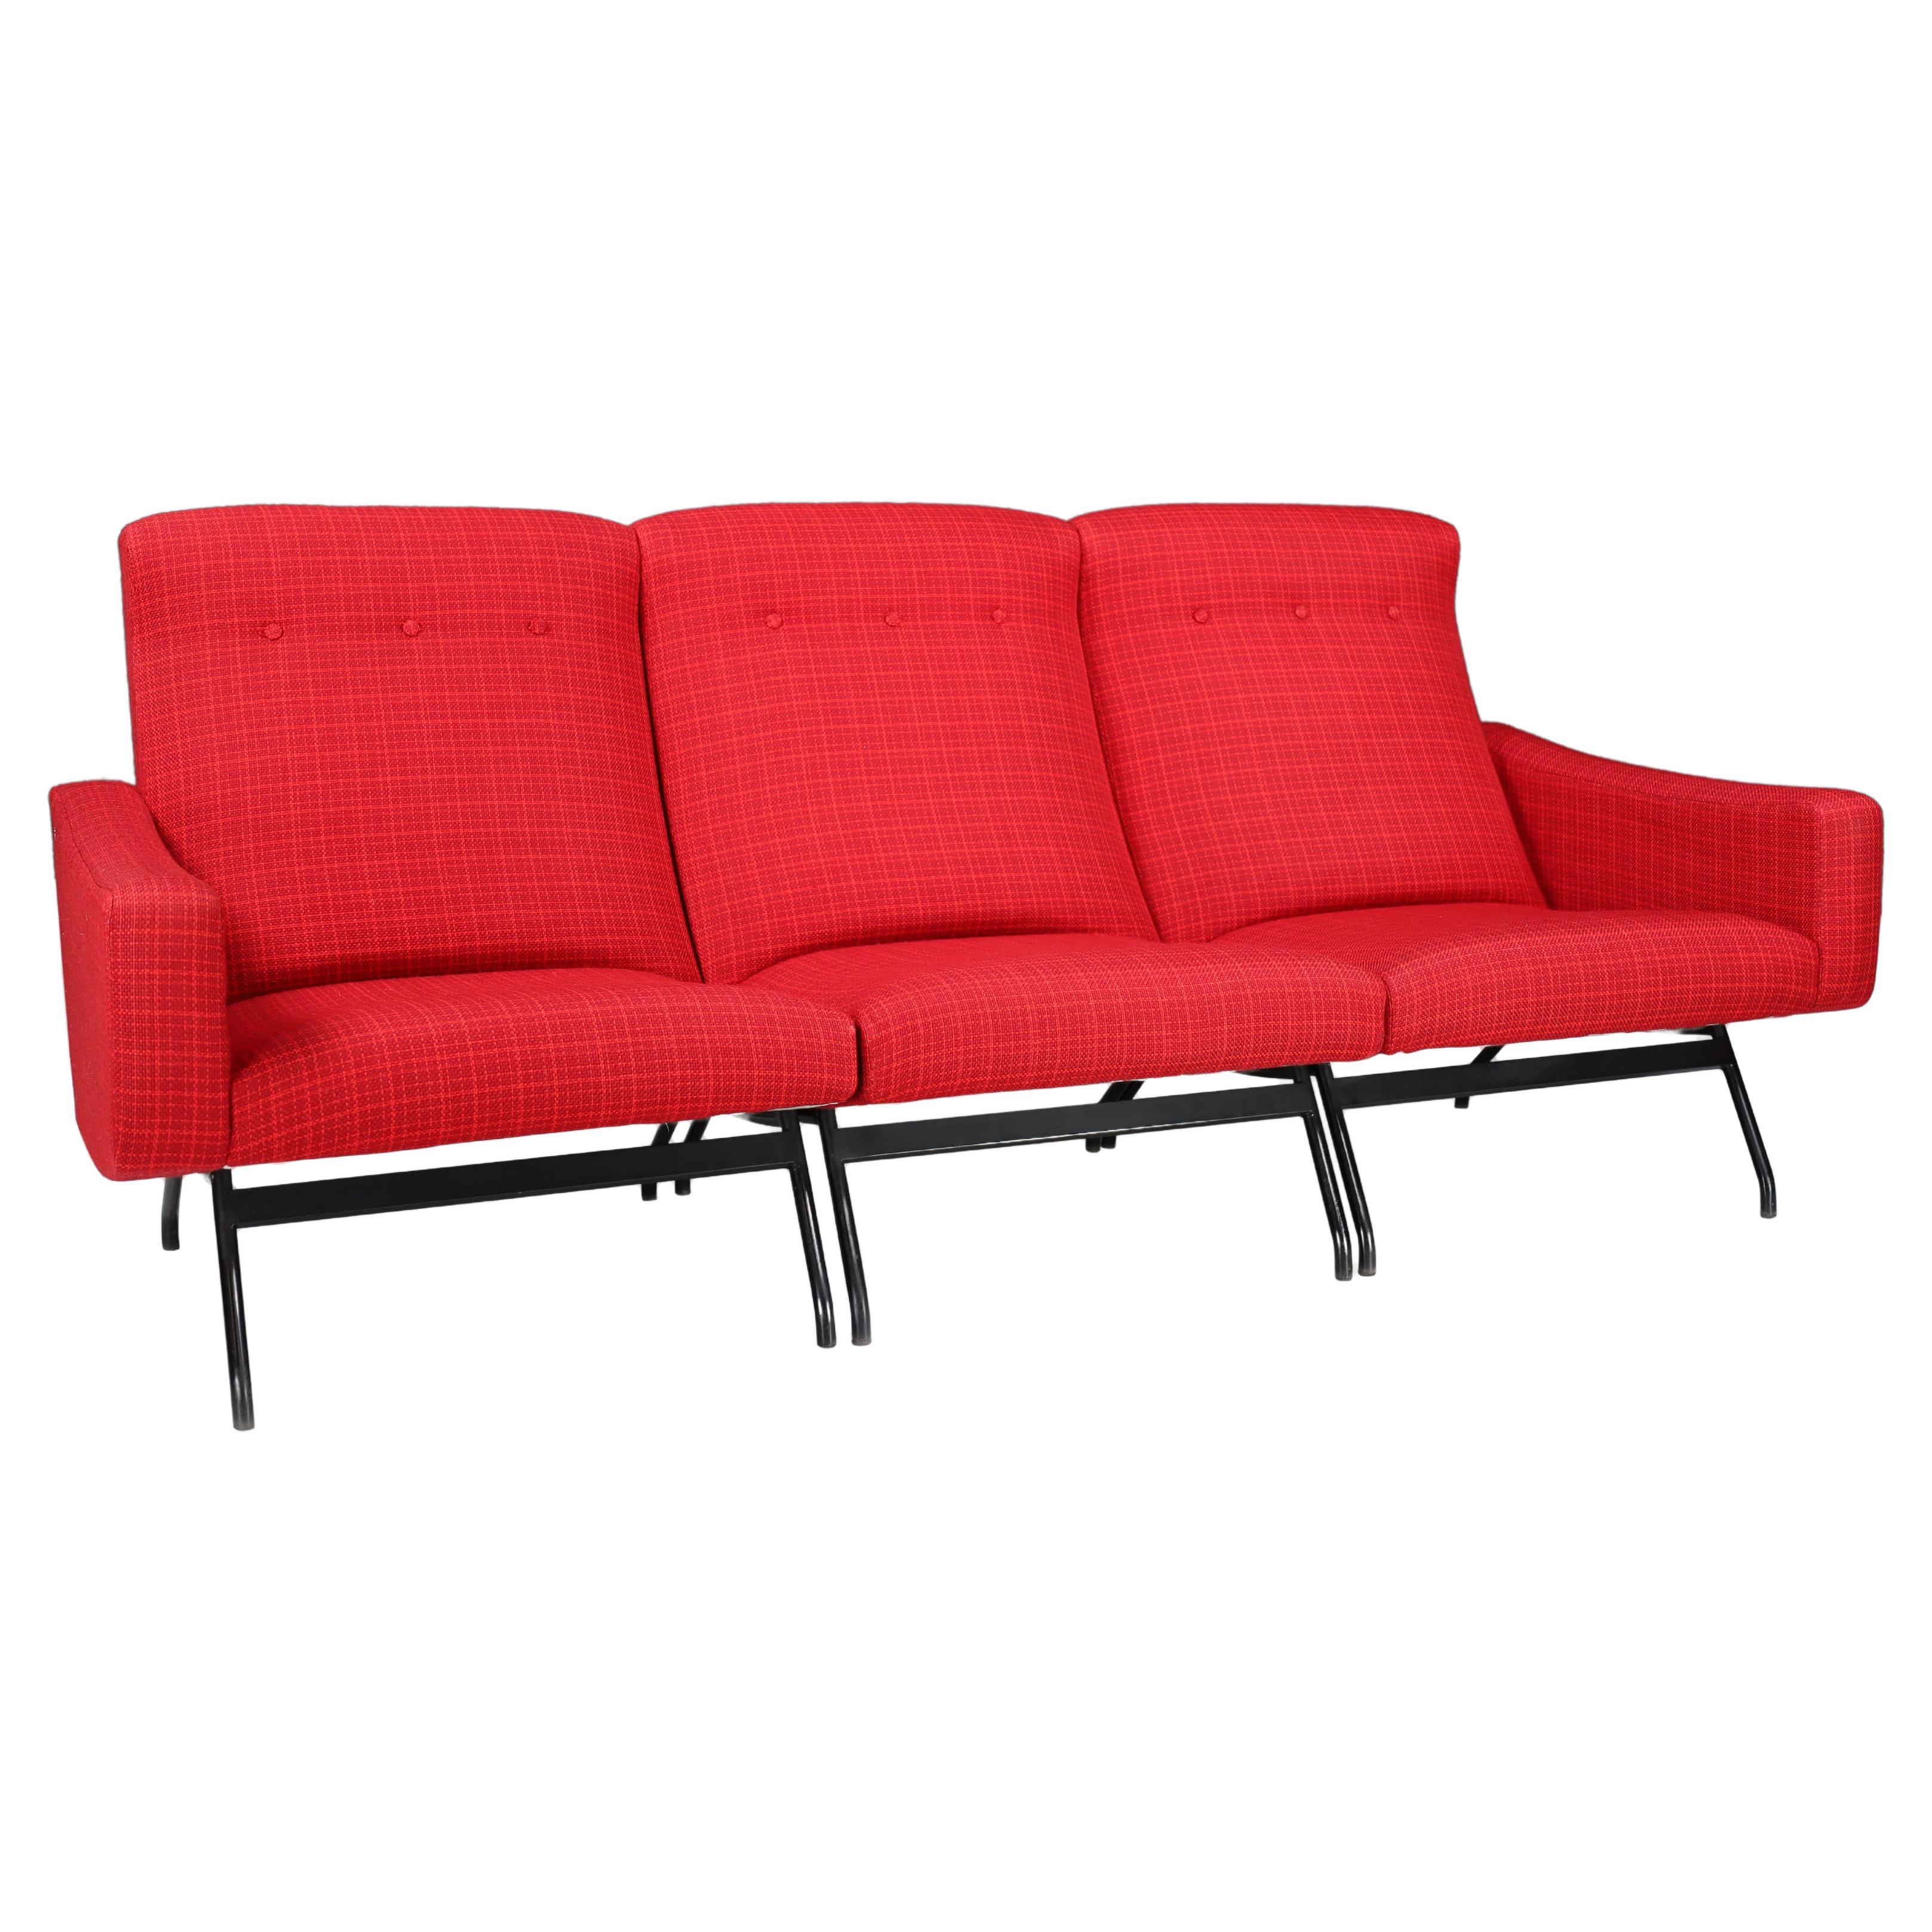 Joseph-André Motte Sectional Sofa Seat in Red Original Upholstery France, 1950s For Sale